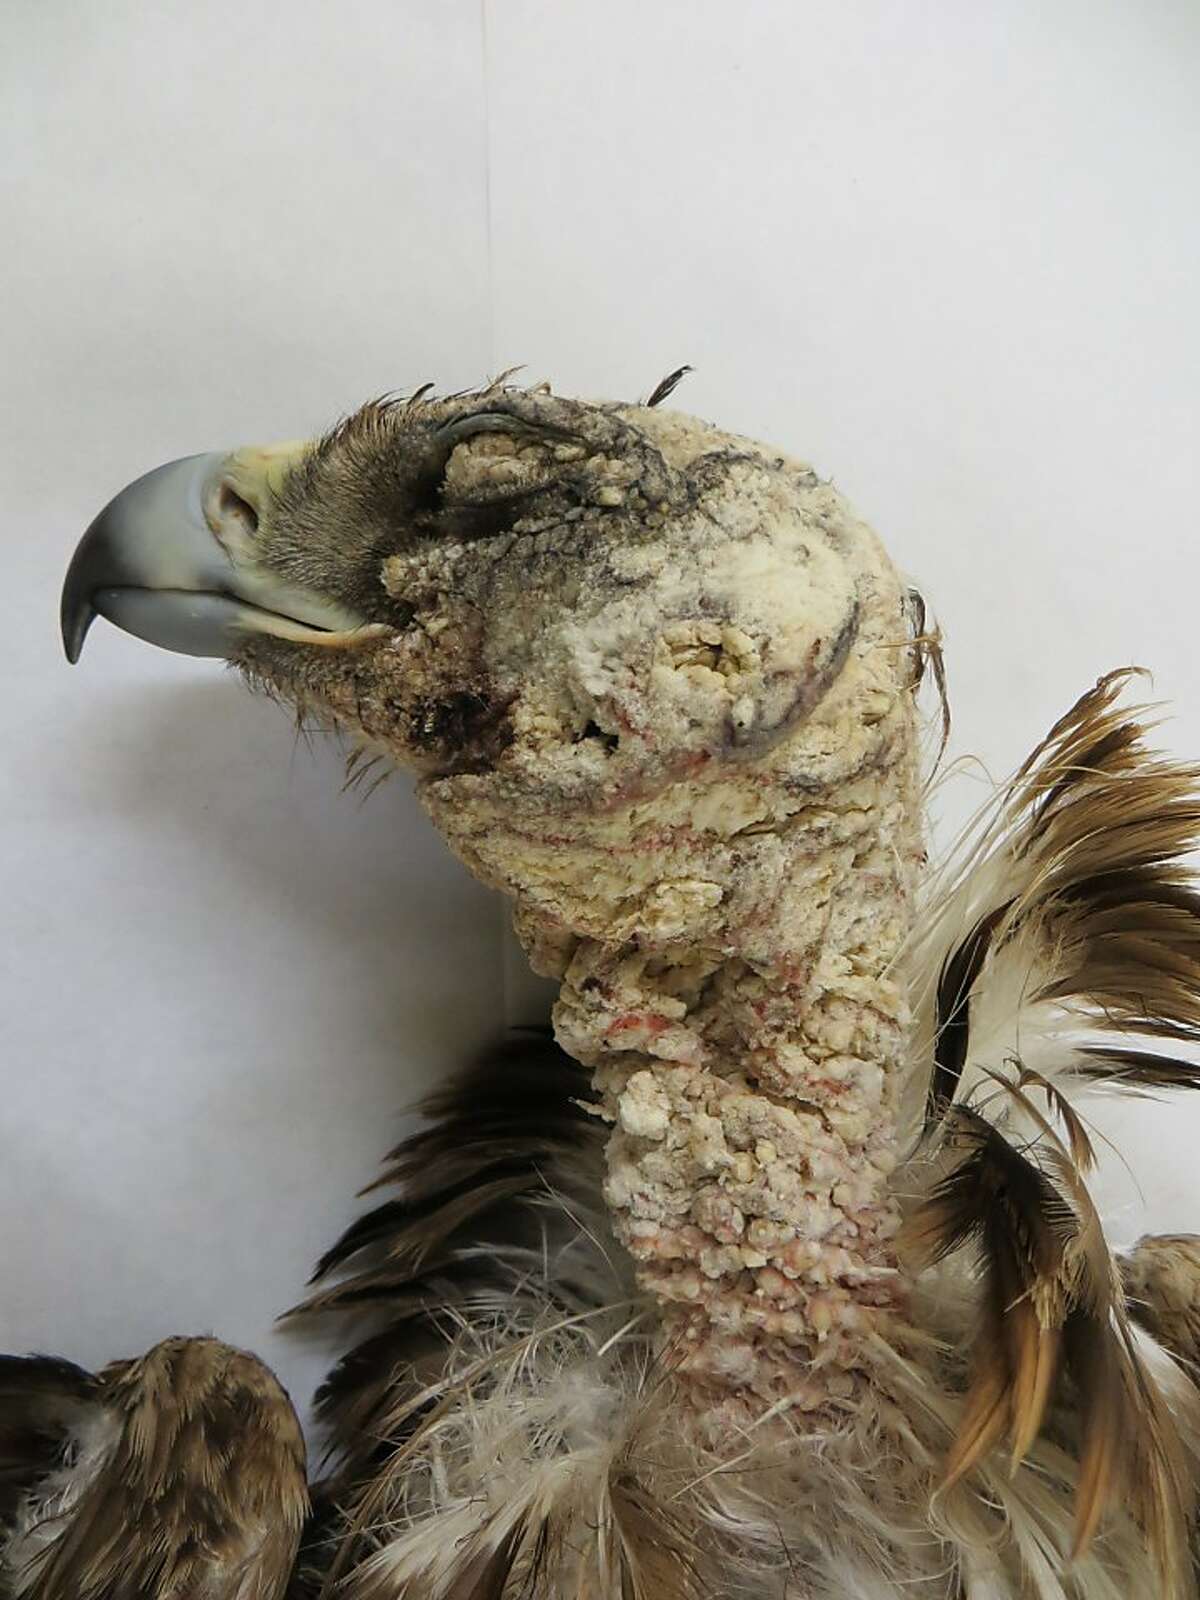 An golden eagle with mange caused by the mysterious mites.